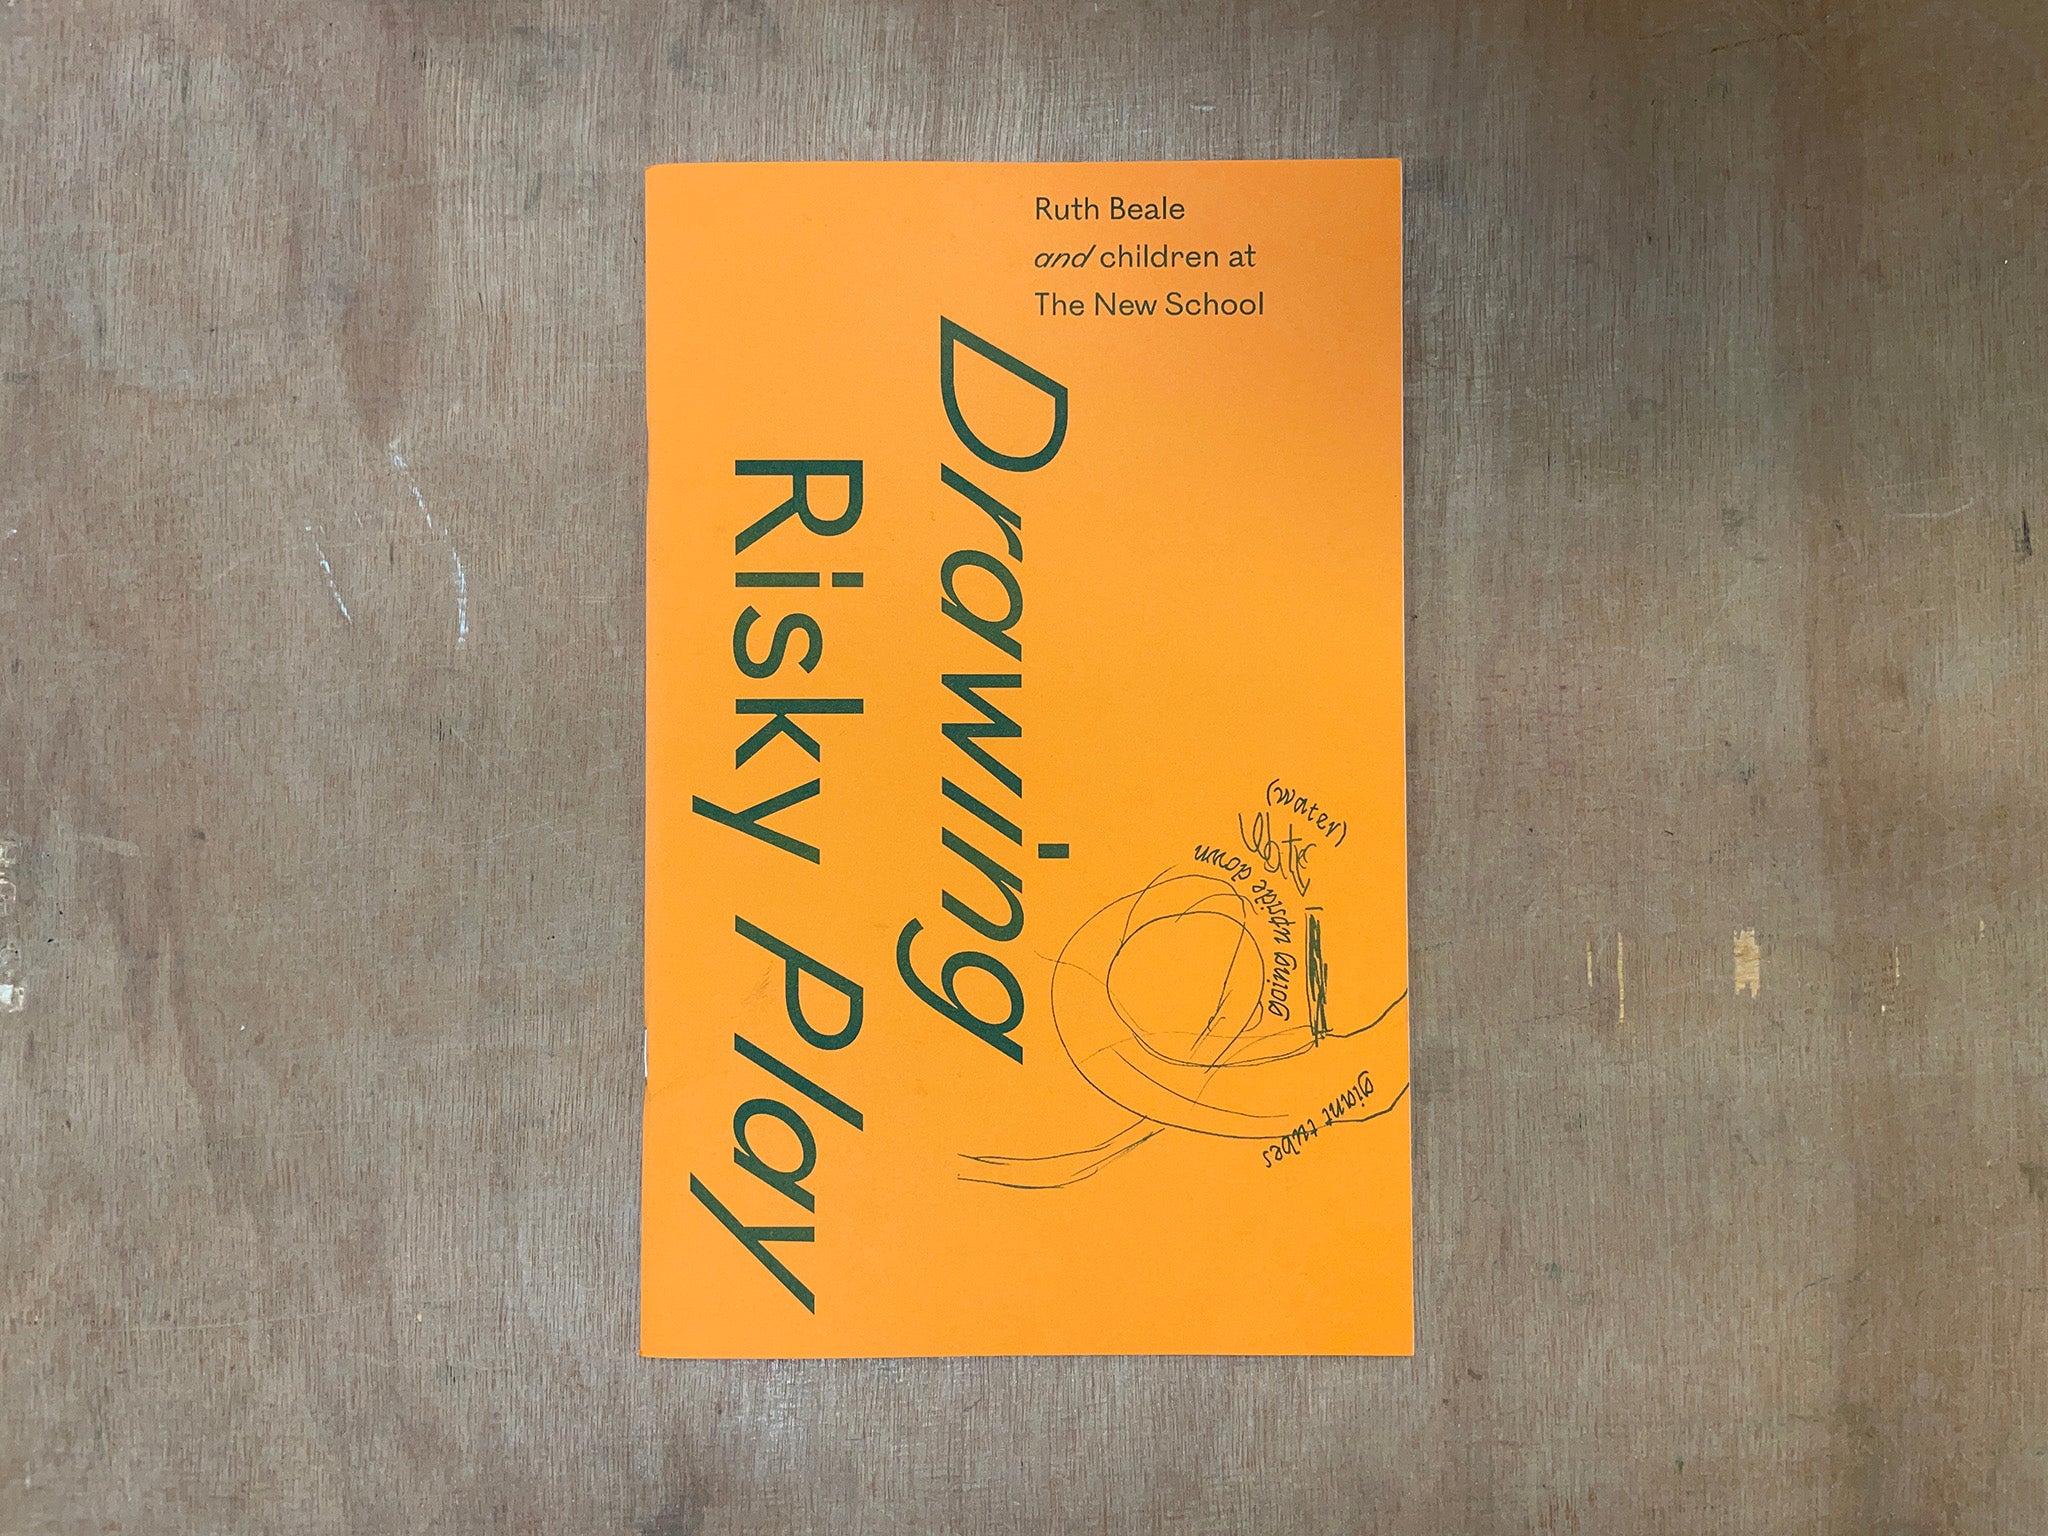 DRAWING RISKY PLAY by Ruth Beale & children at The New School